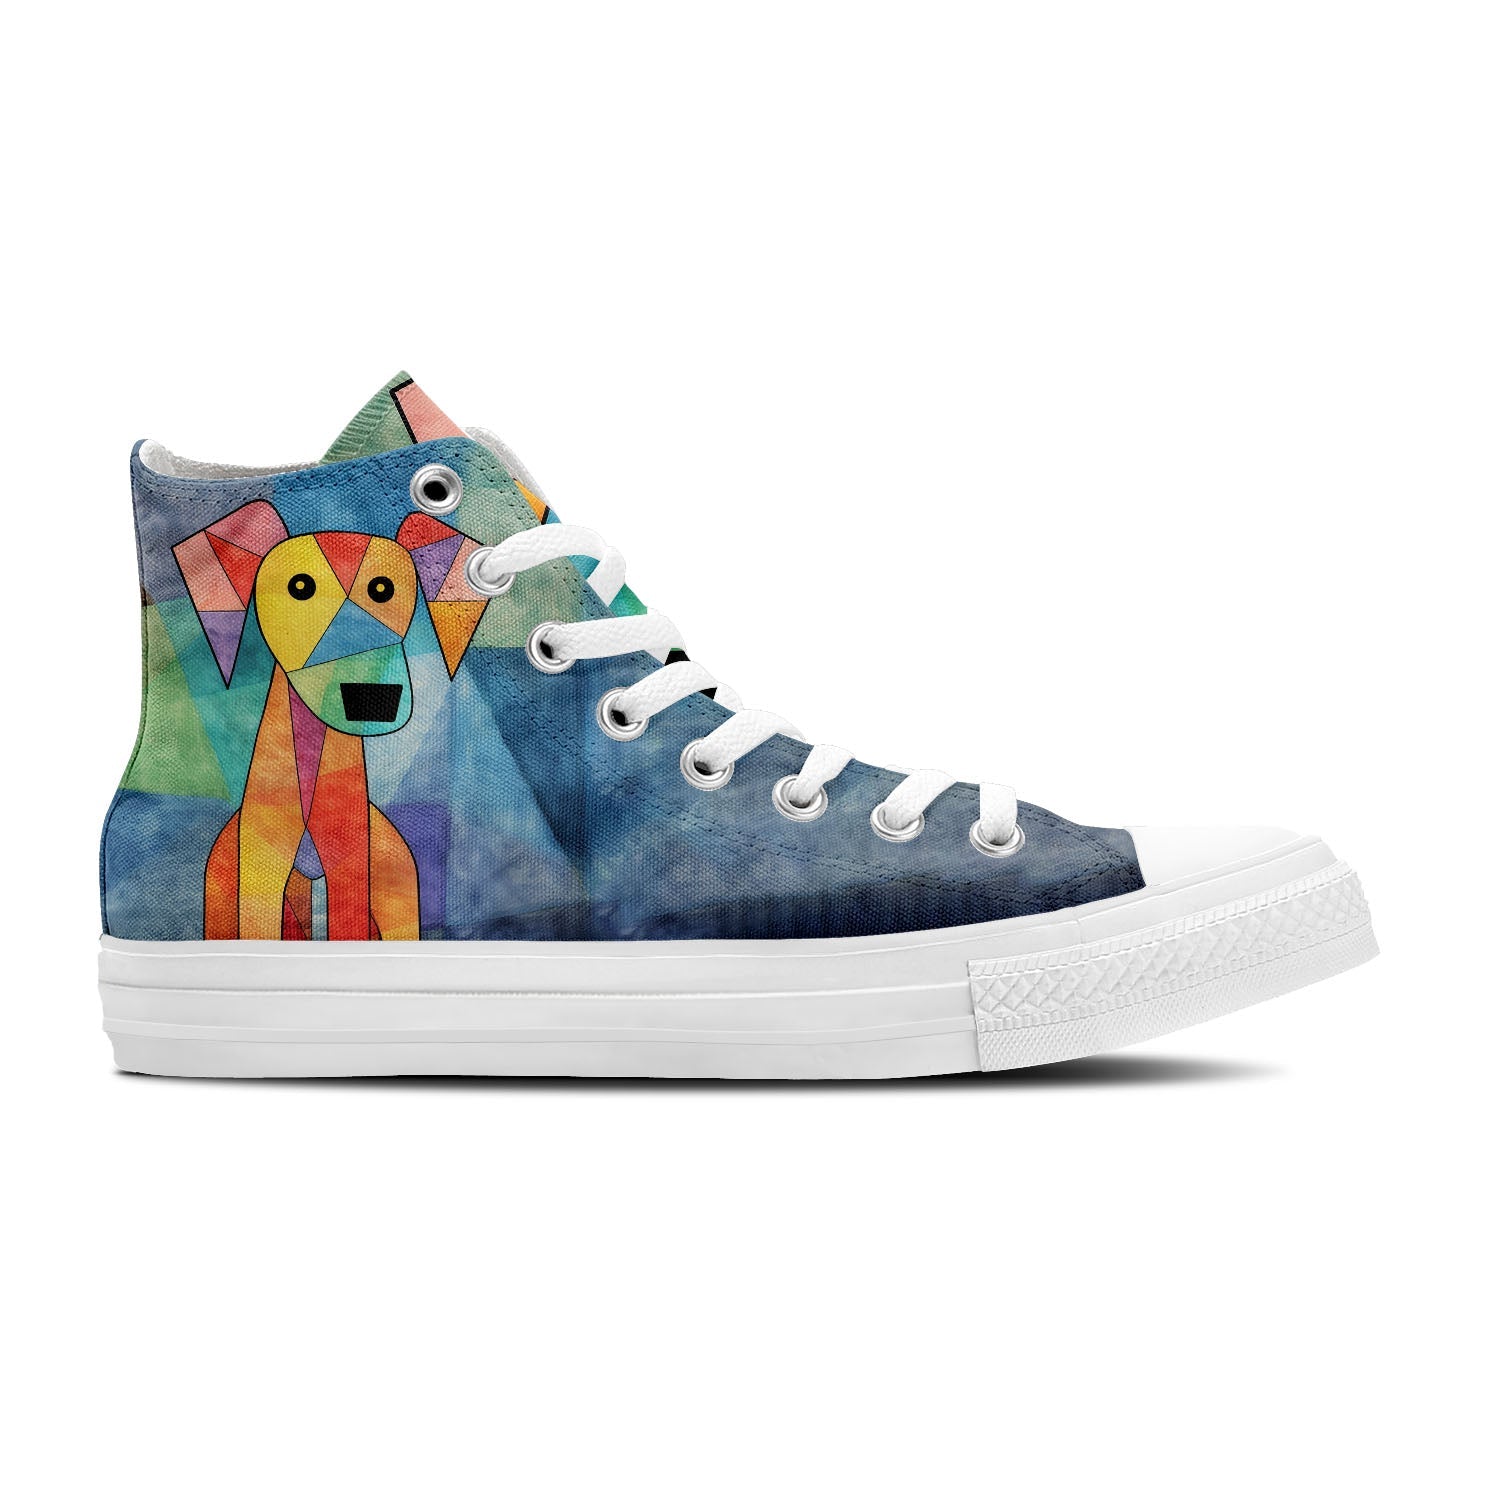 Feline Fantasia: Unleash Your Creative Side with Central-High Canvas Shoes - Unisex Fashion Adorned with the Captivating Grace of Artistic Cat Prints